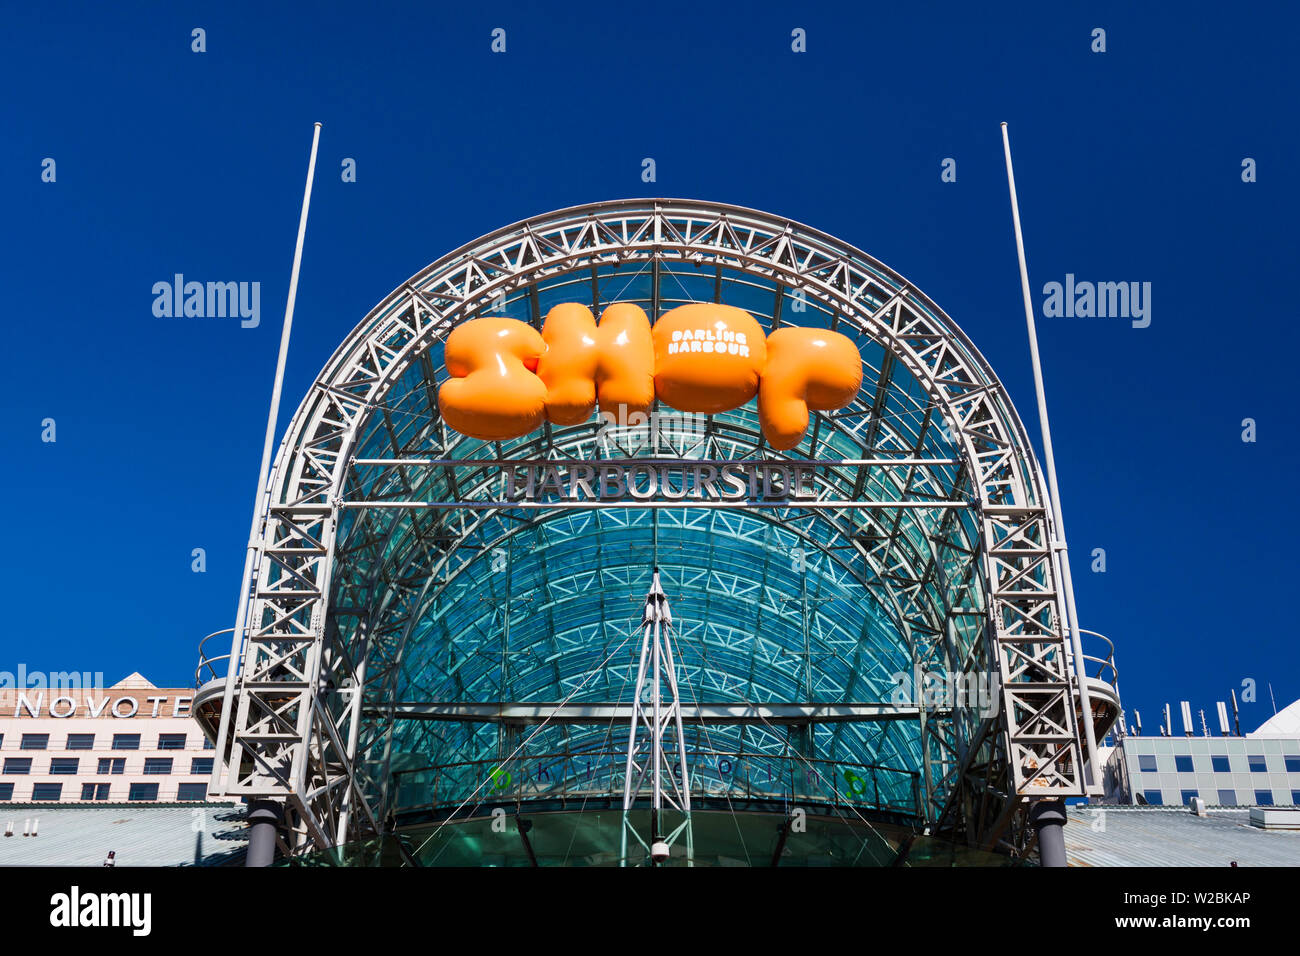 Australia, New South Wales, NSW, Sydney, Darling Harbour, entrance to the Harbourside shopping complex Stock Photo